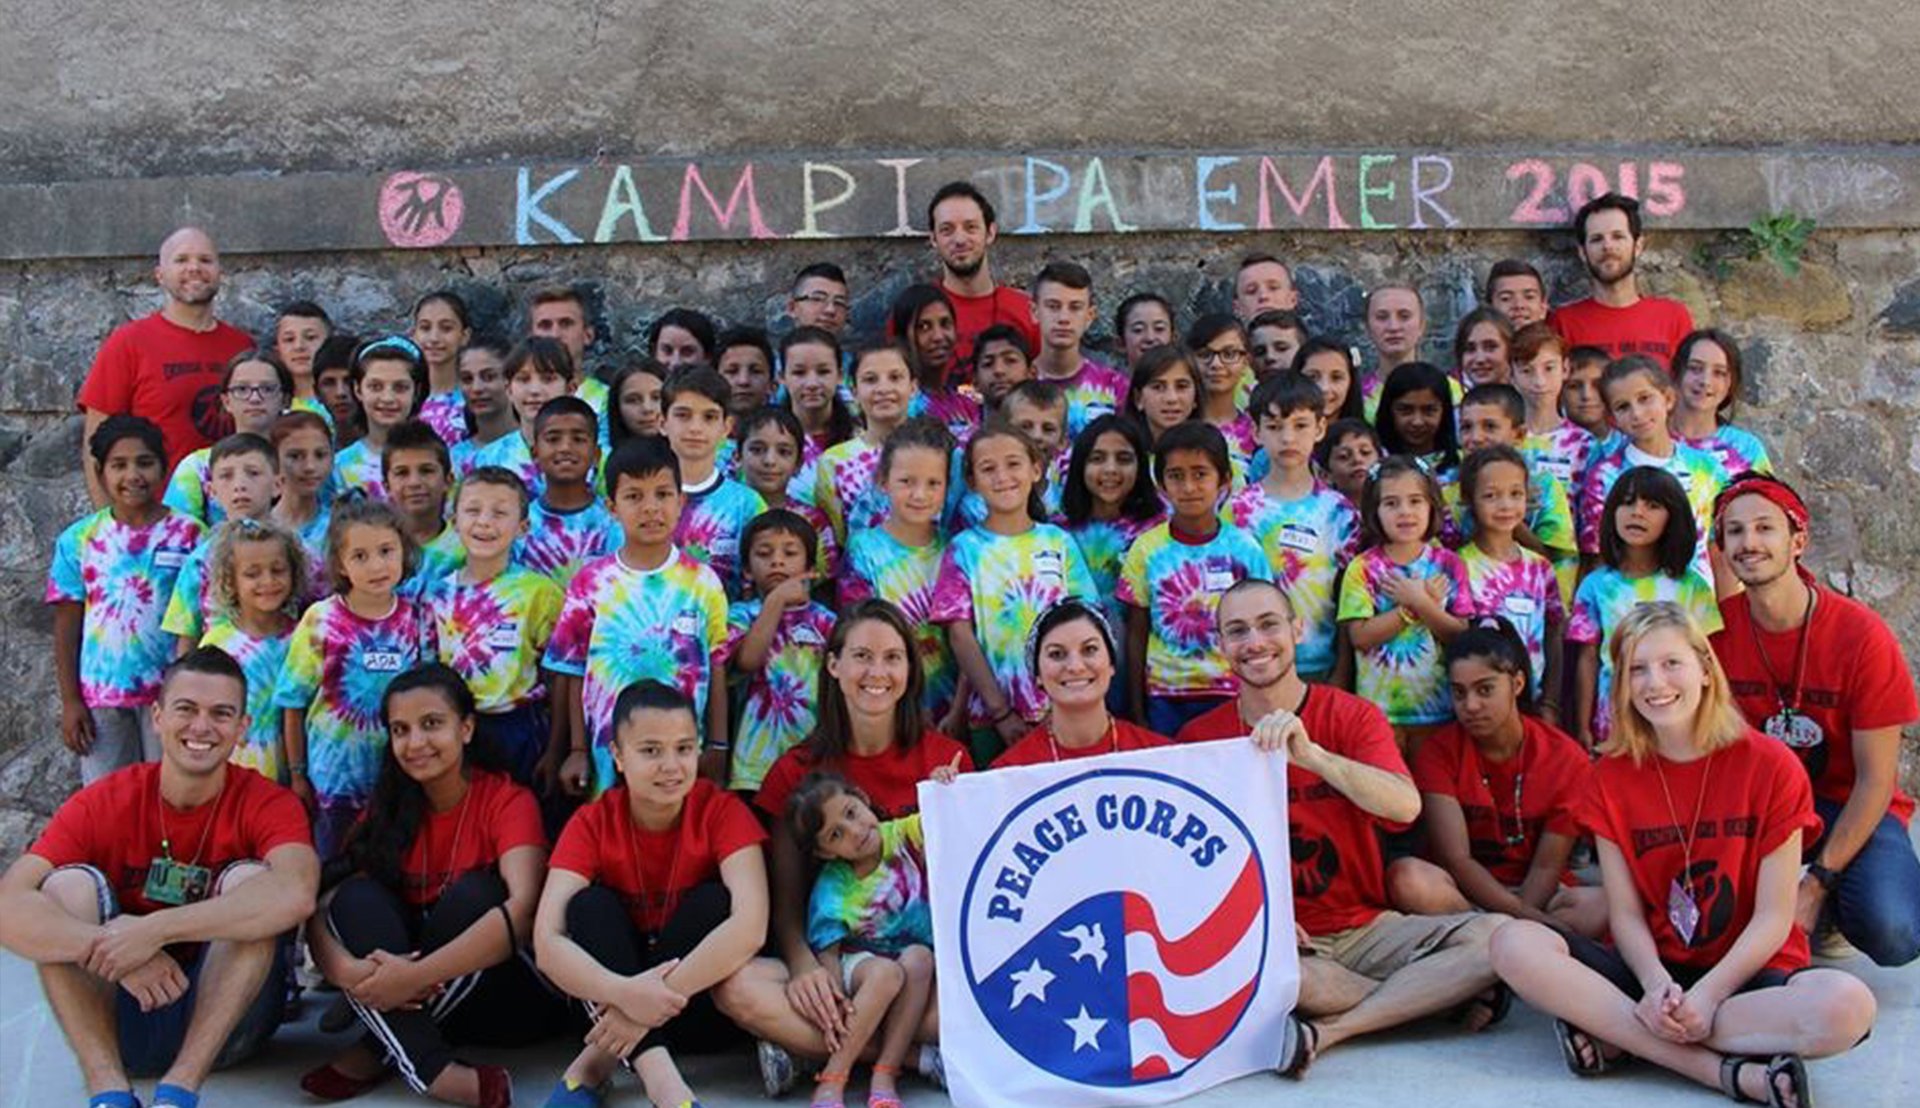 Rutgers Global – Peace Corps Professional Benefits, Jon Breen and other Peace Corps volunteers post with children at a youth center in Albania